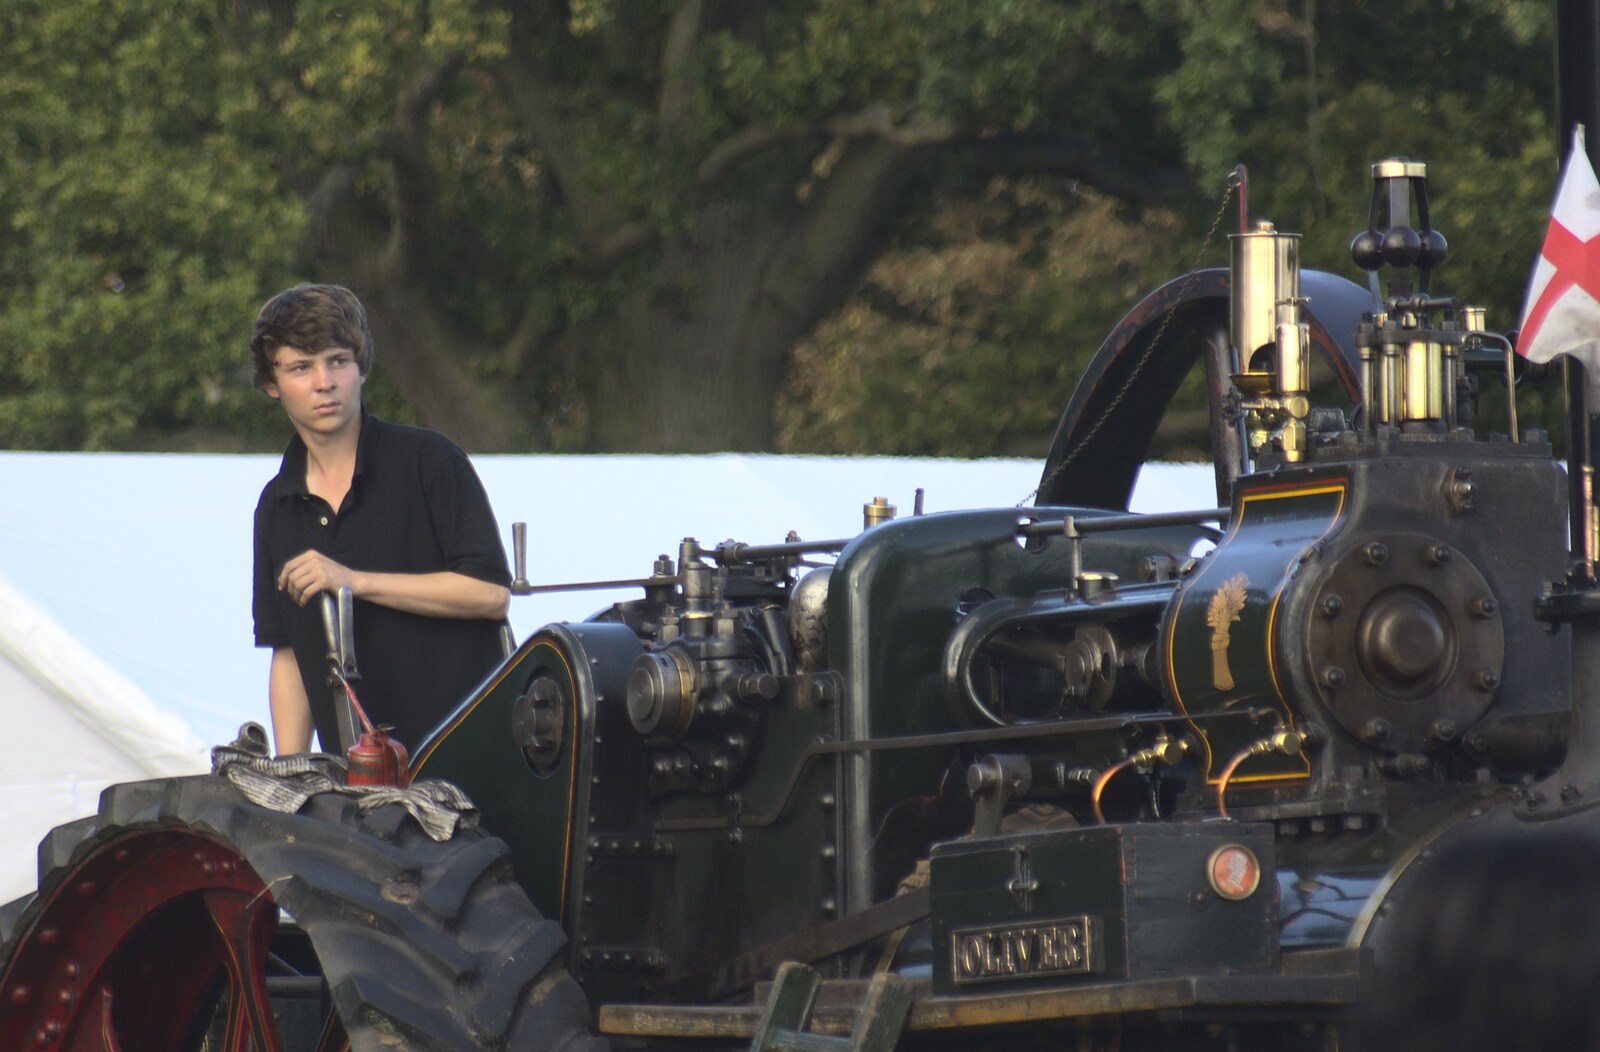 Some dude on a steam engine from The Eye Show, Palgrave, Suffolk - 30th August 2010